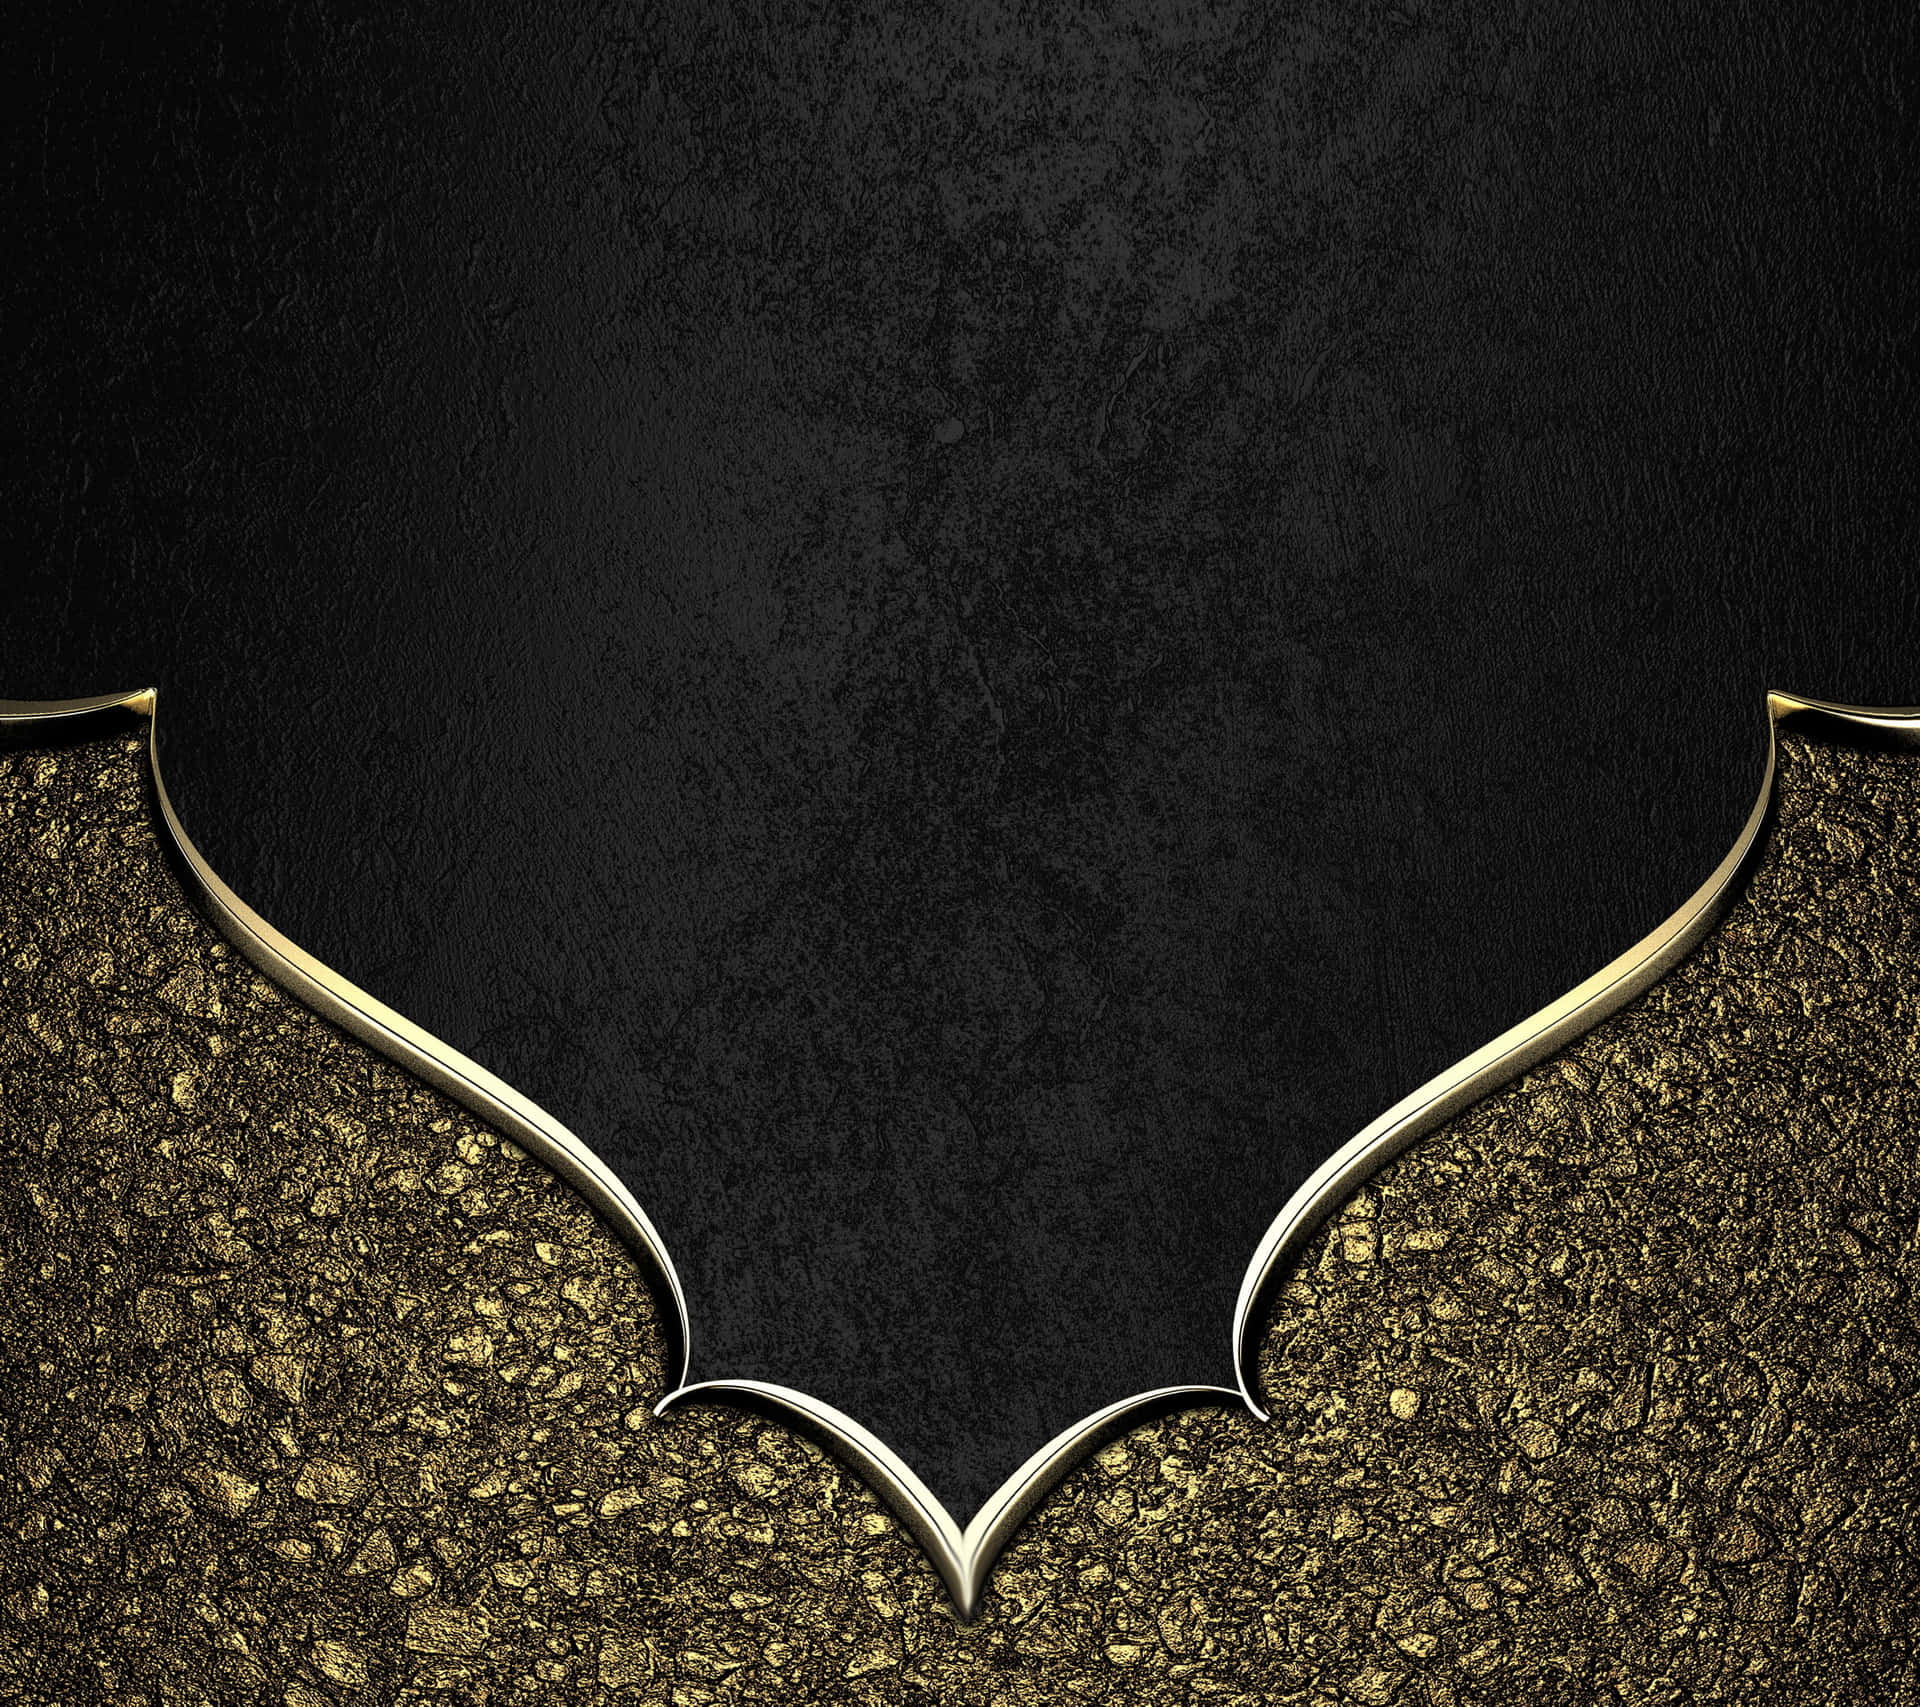 An elegant black and gold background that exudes an air of sophistication